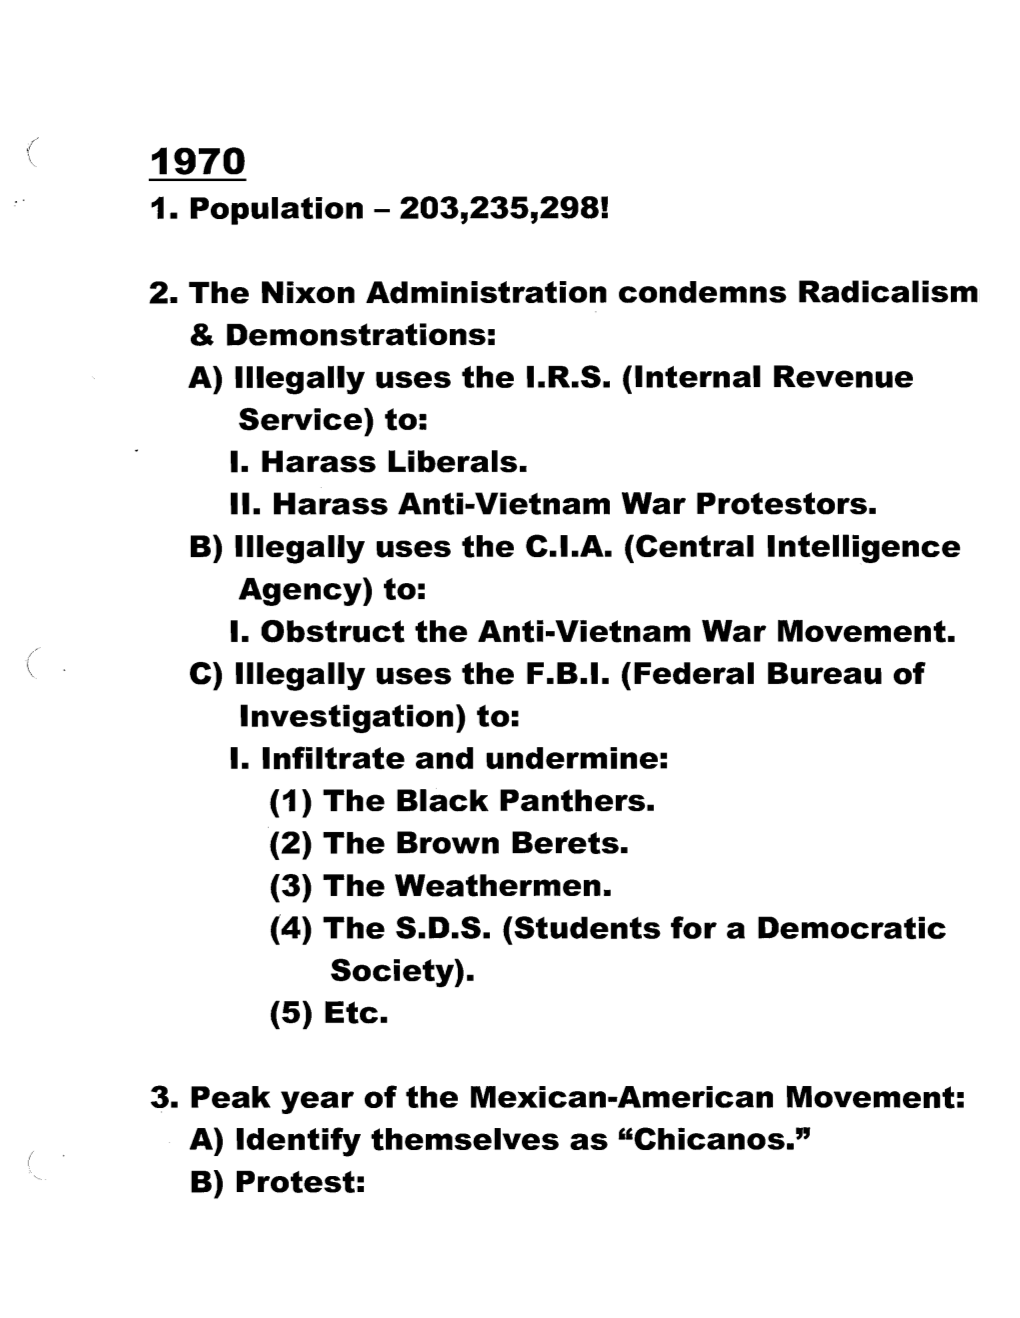 2. the Nixon Administration Condemns Radicalism & Demonstrations: A) Illegally Uses the I.R.S